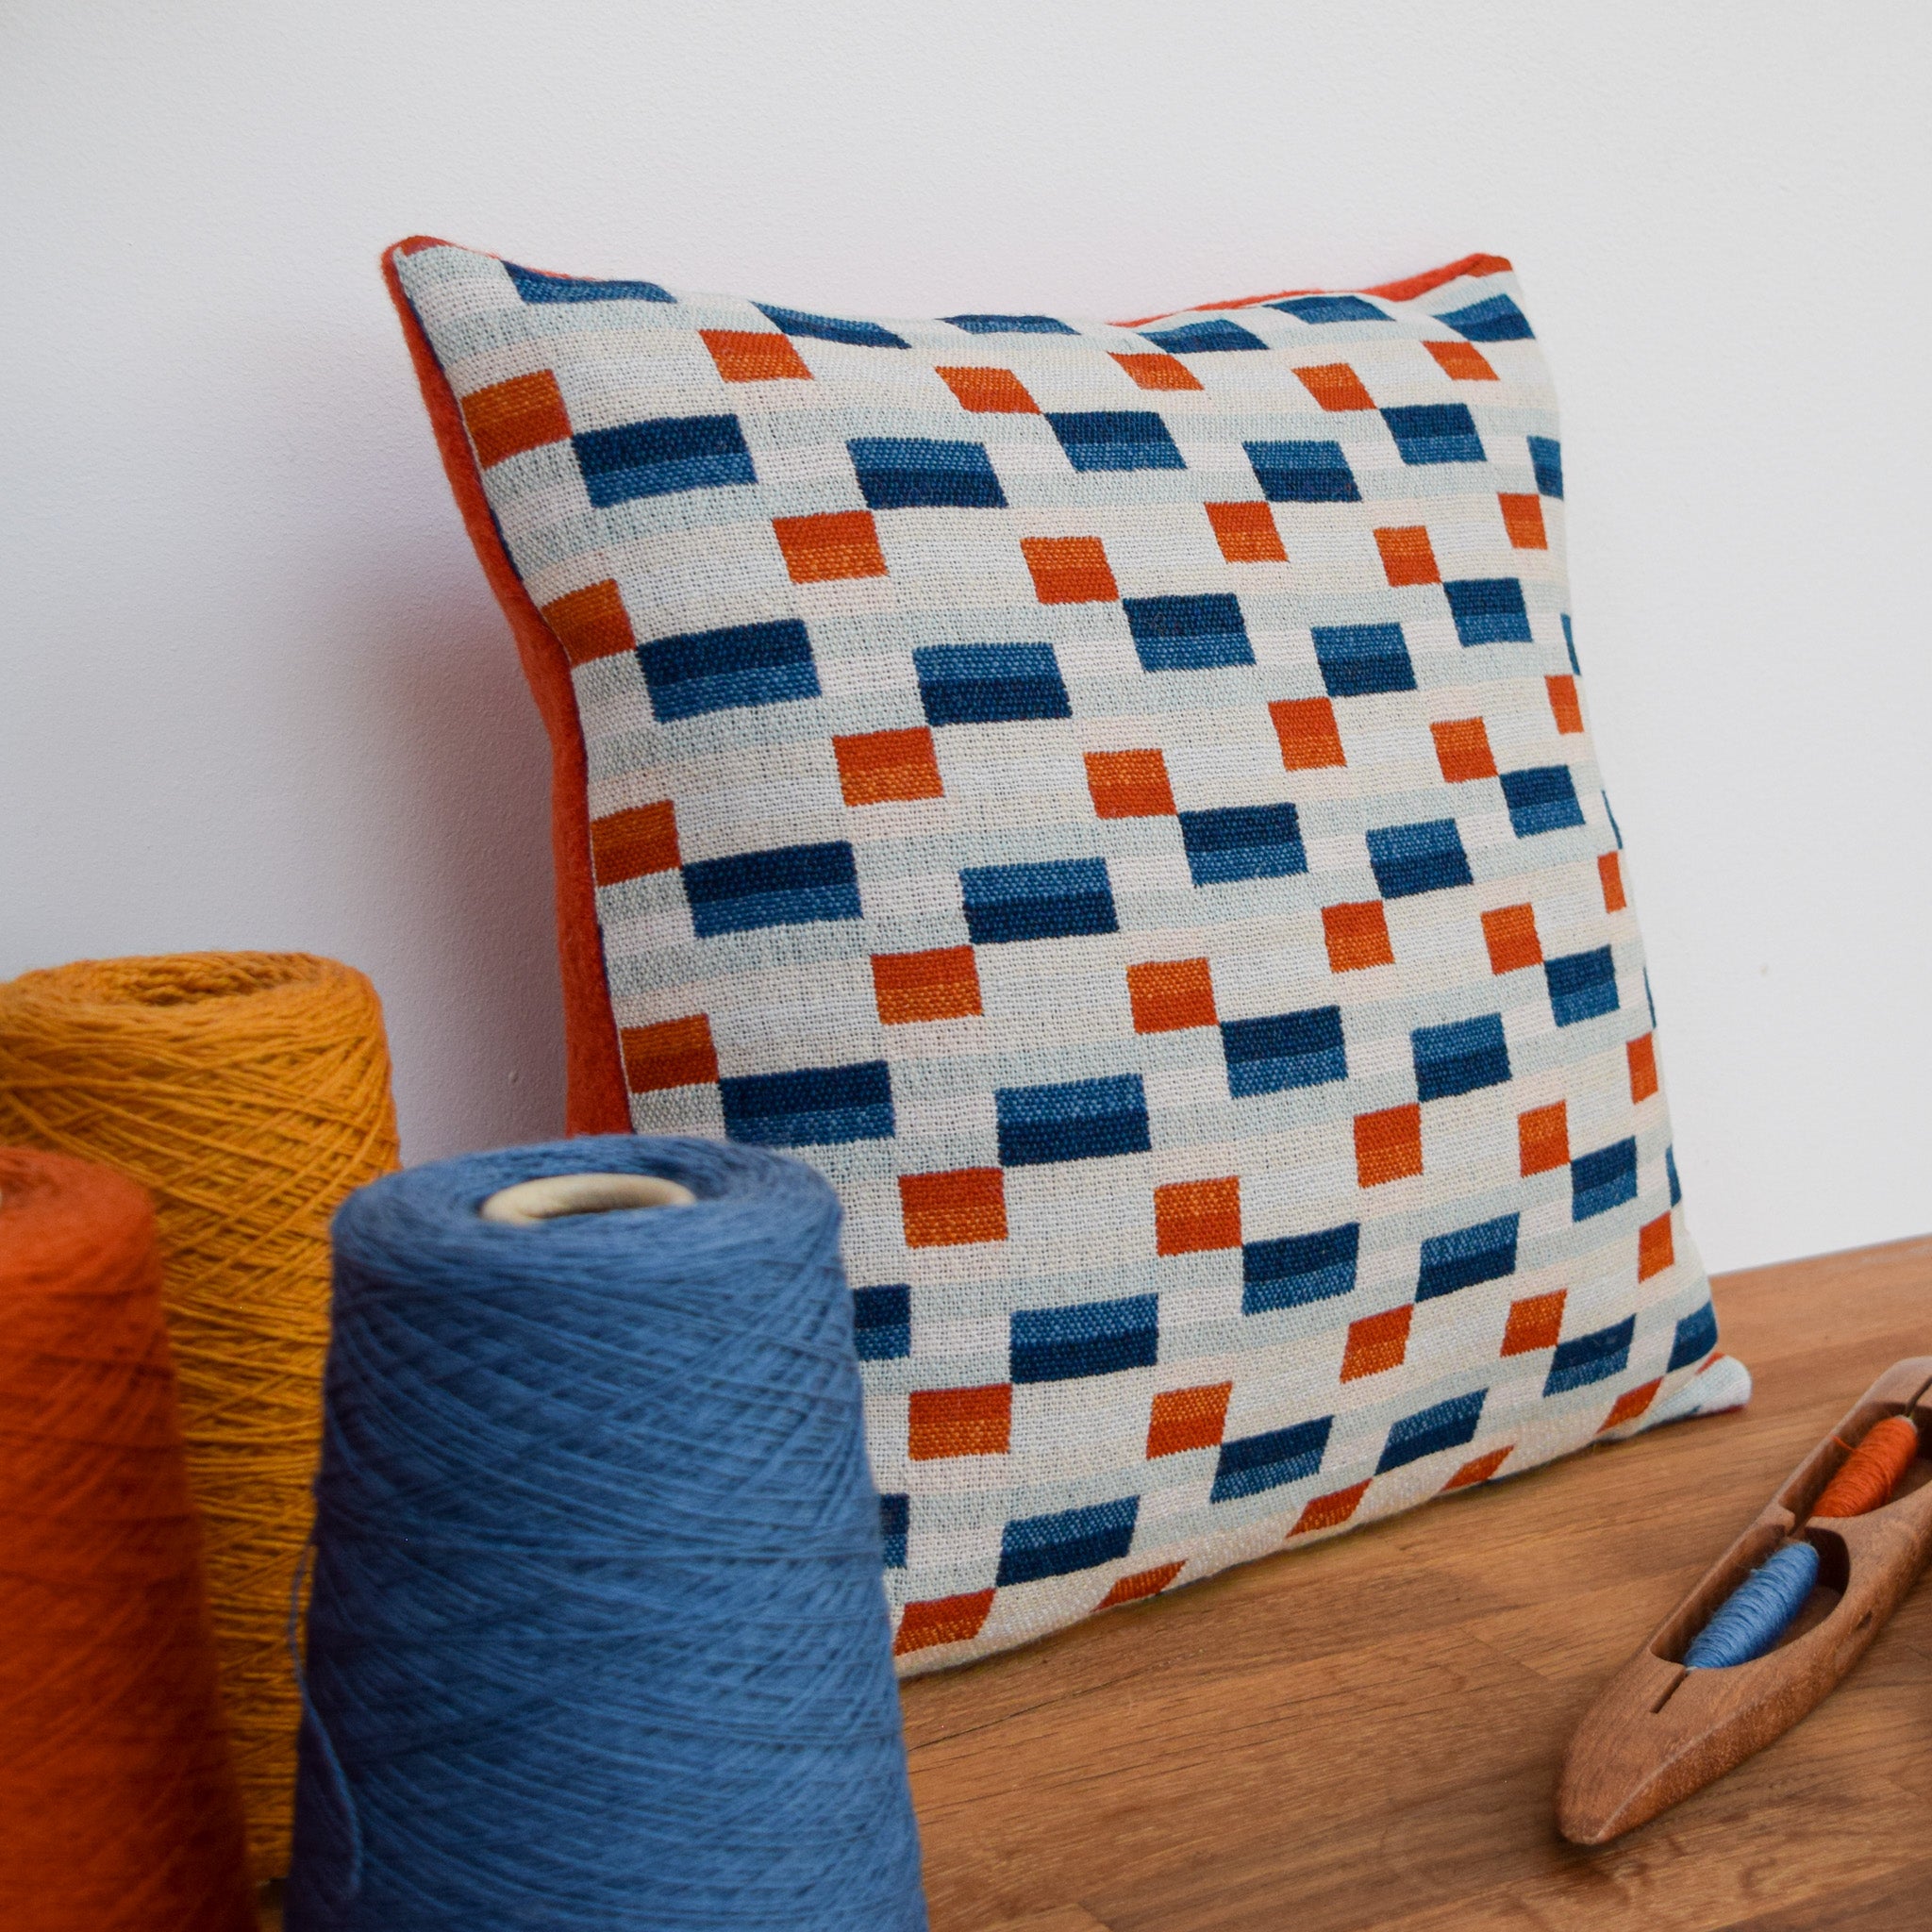 A handwoven cushion, designed with varying shades of blue, orange and buttercup rectangles sits in the centre.  It has a burnt orange boiled wool backing.  In the foreground sit 3 cones of weaving yarn showing the thread used within the design.  Alongside sits a wooden shuttle,  a tool used to weave the fabric.